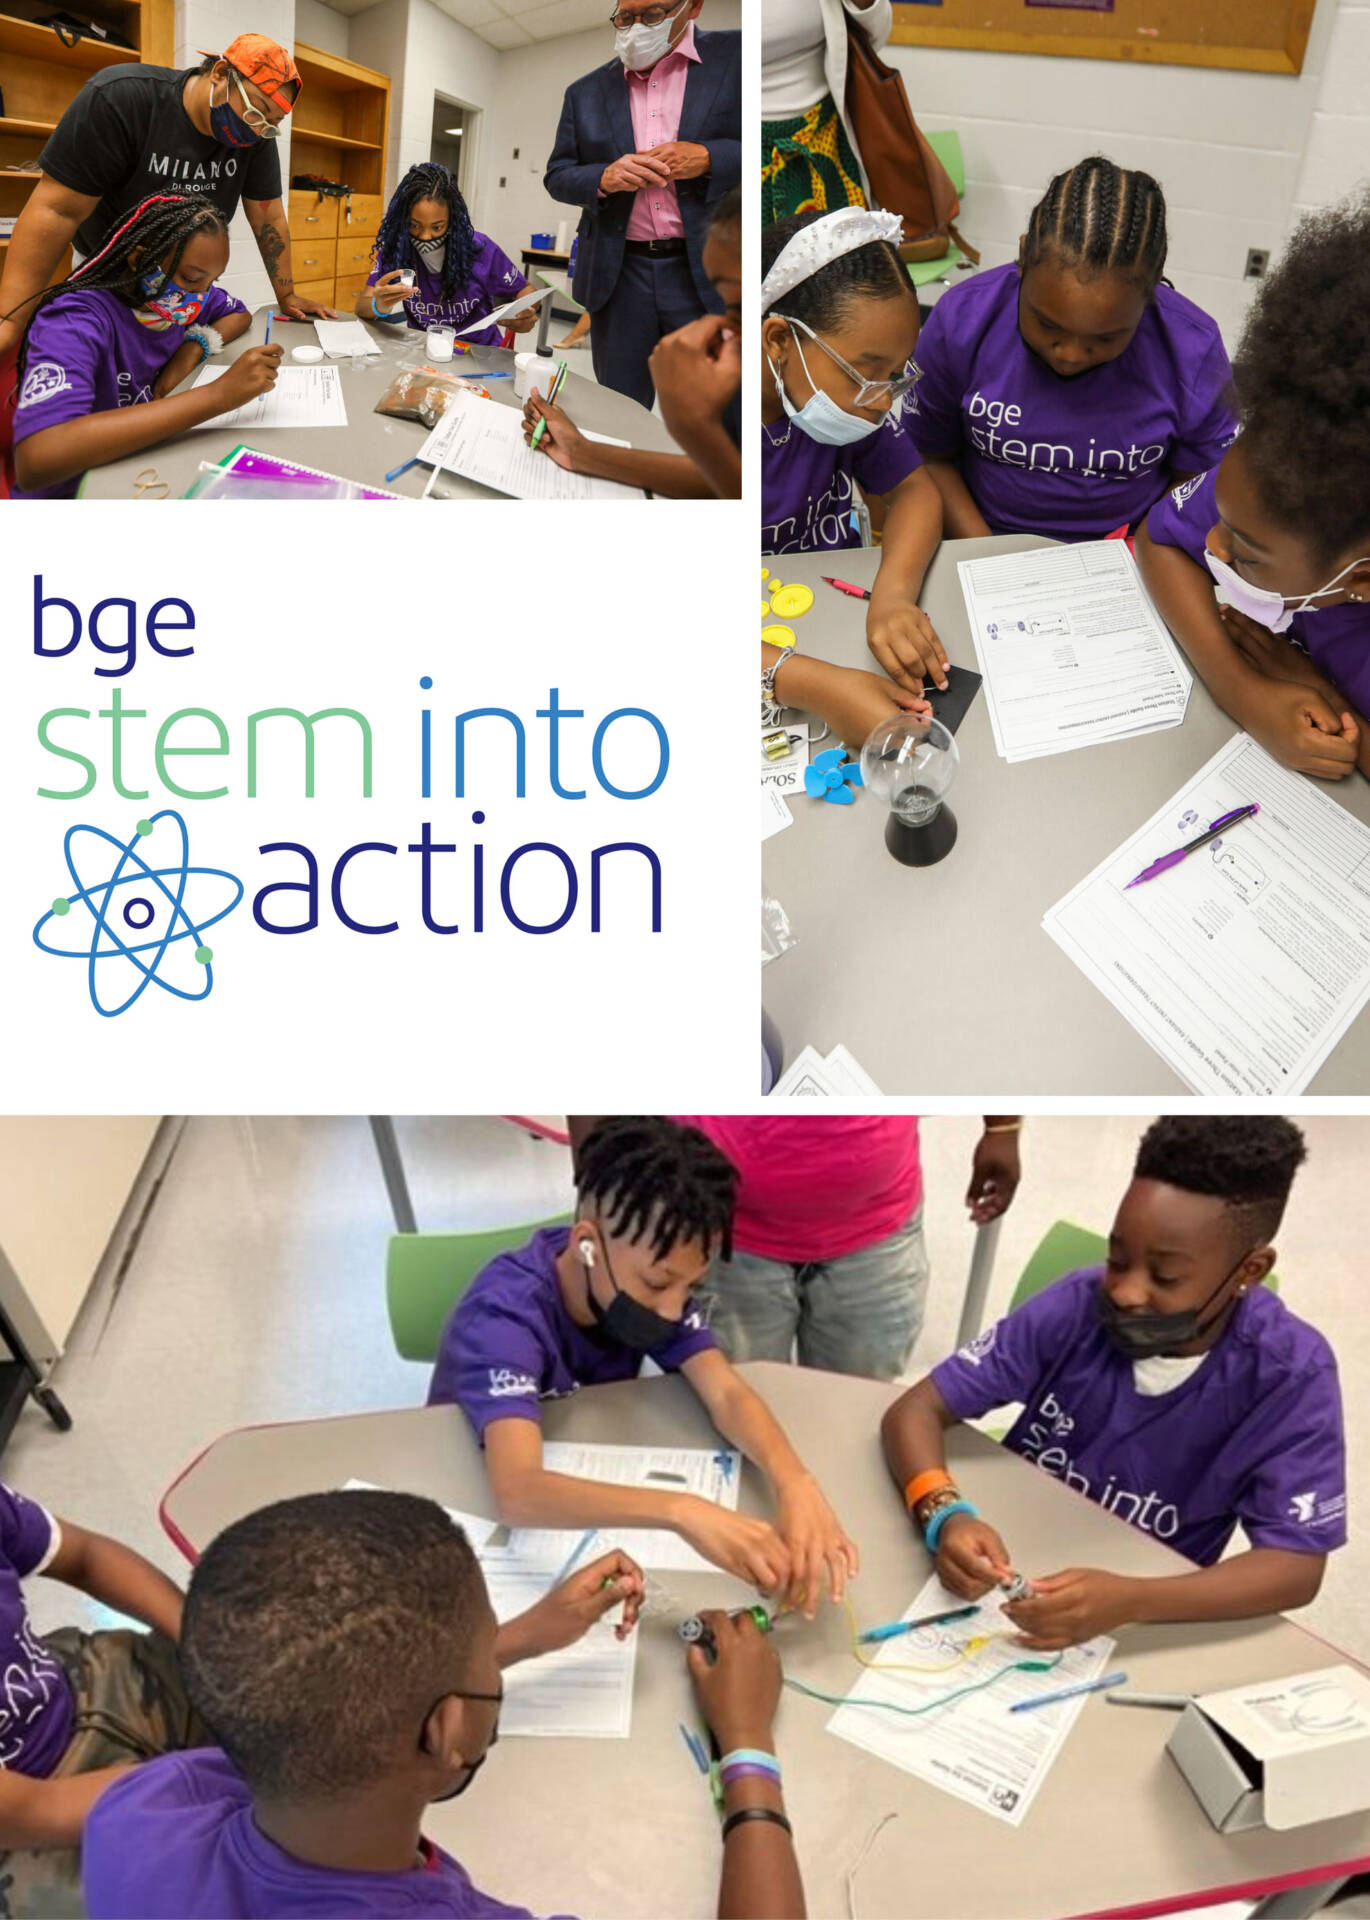 Collage of photos of students working in the BGE STEM into action program